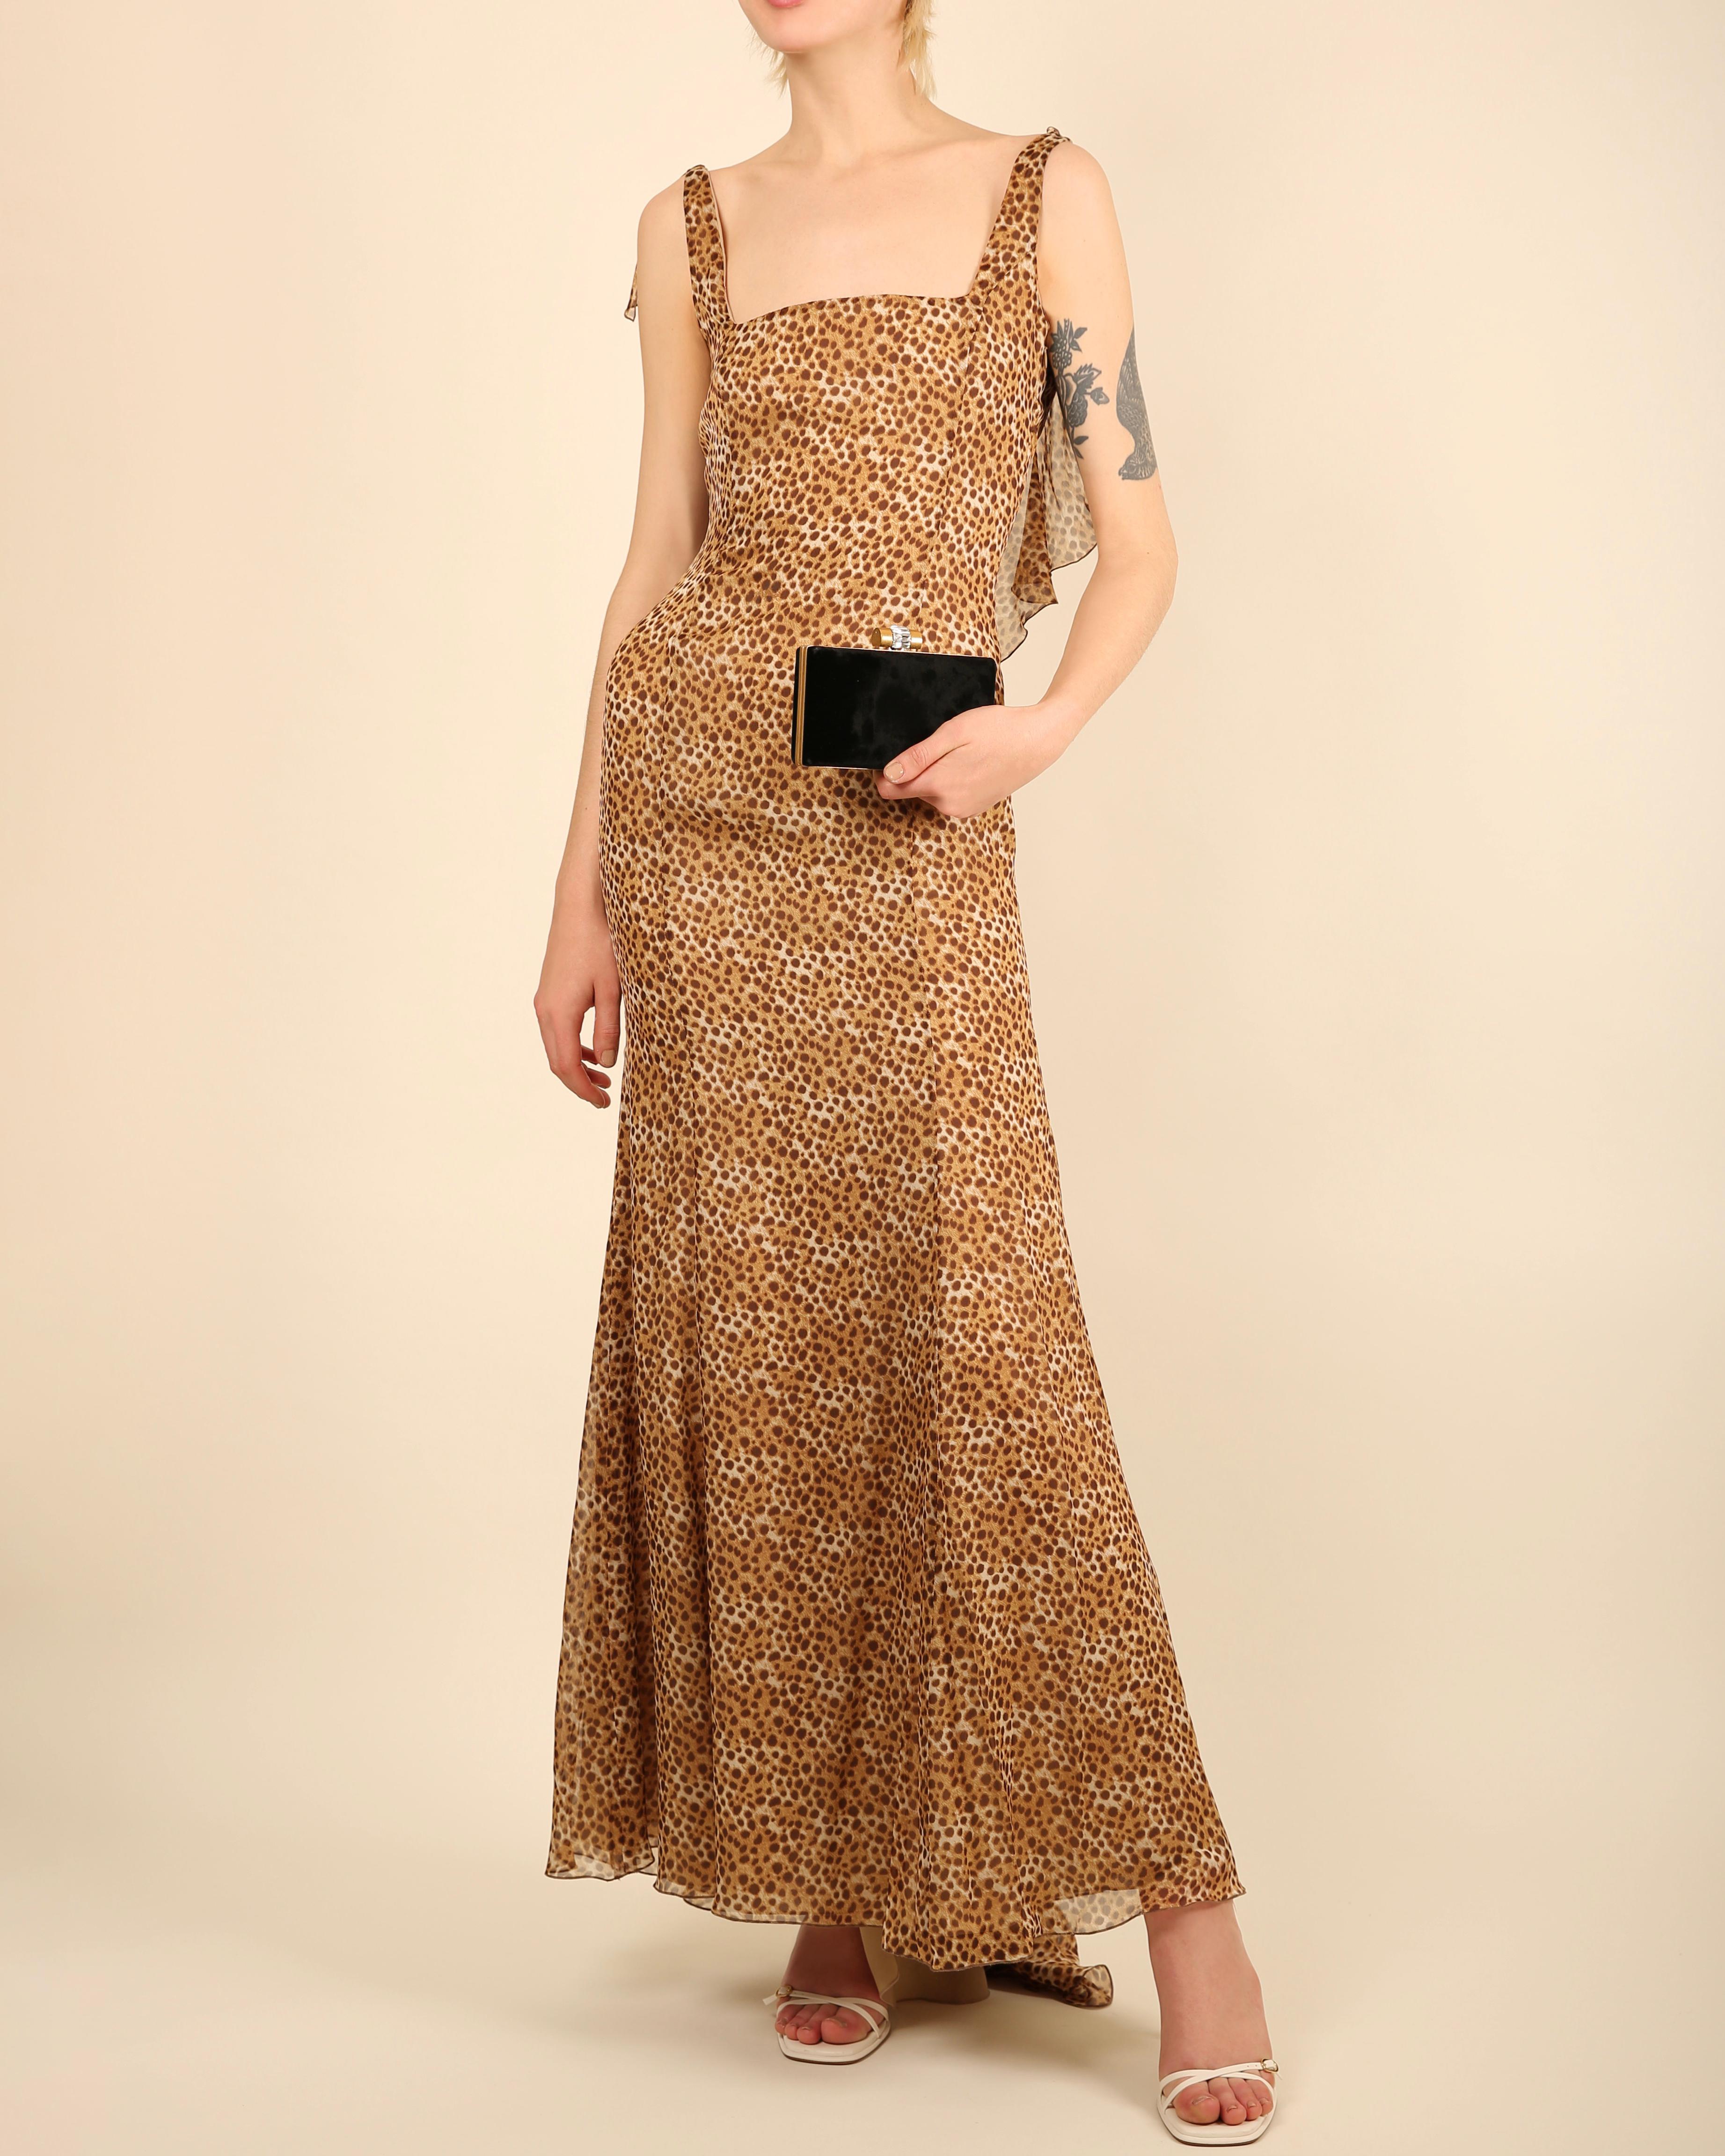 Valentino circa 1990 vintage sleeveless brown leopard print backless dress gown 3